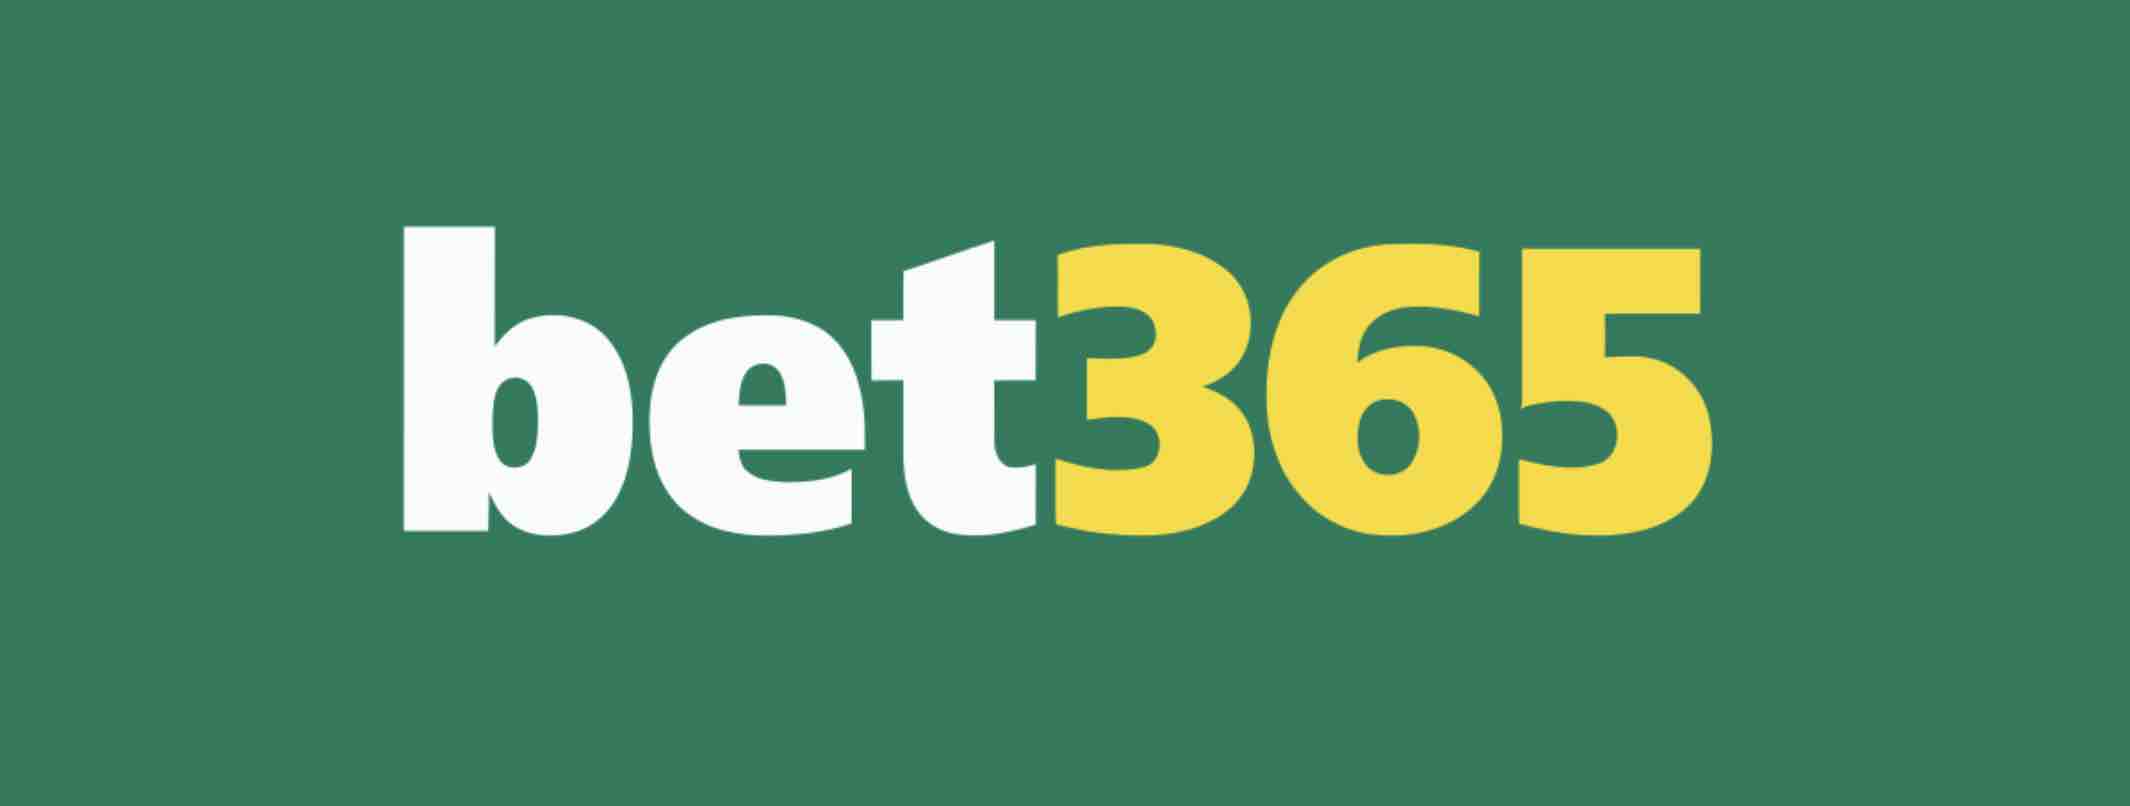 Bet365 Tuesday Stick or Twist - Get up to 100 Free Spins